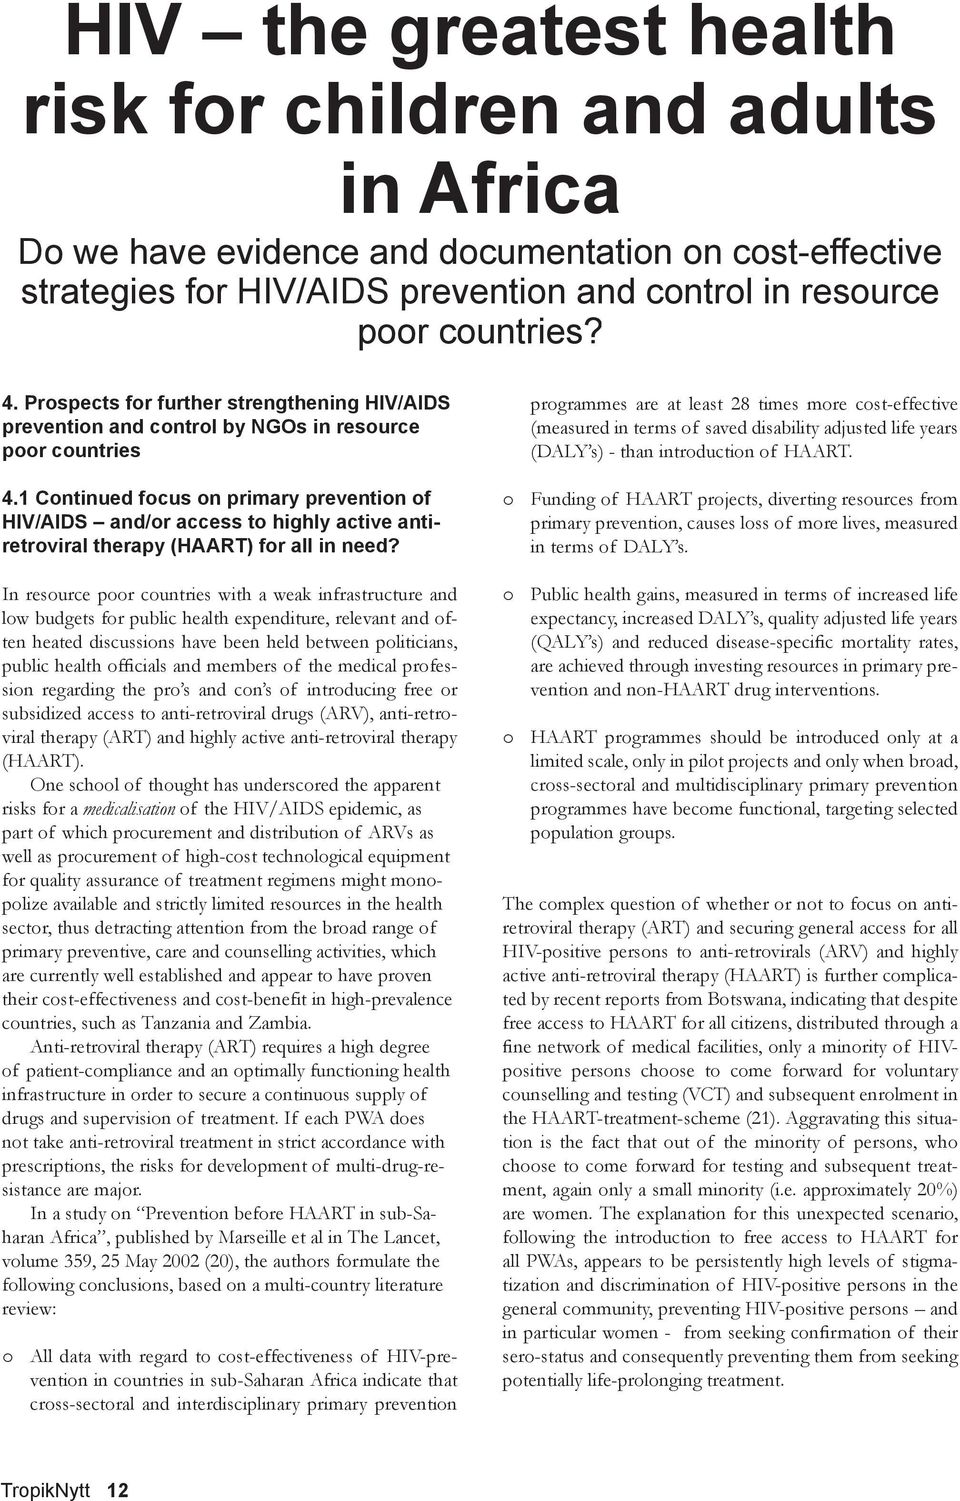 1 Continued focus on primary prevention of HIV/AIDS and/or access to highly active antiretroviral therapy (HAART) for all in need?